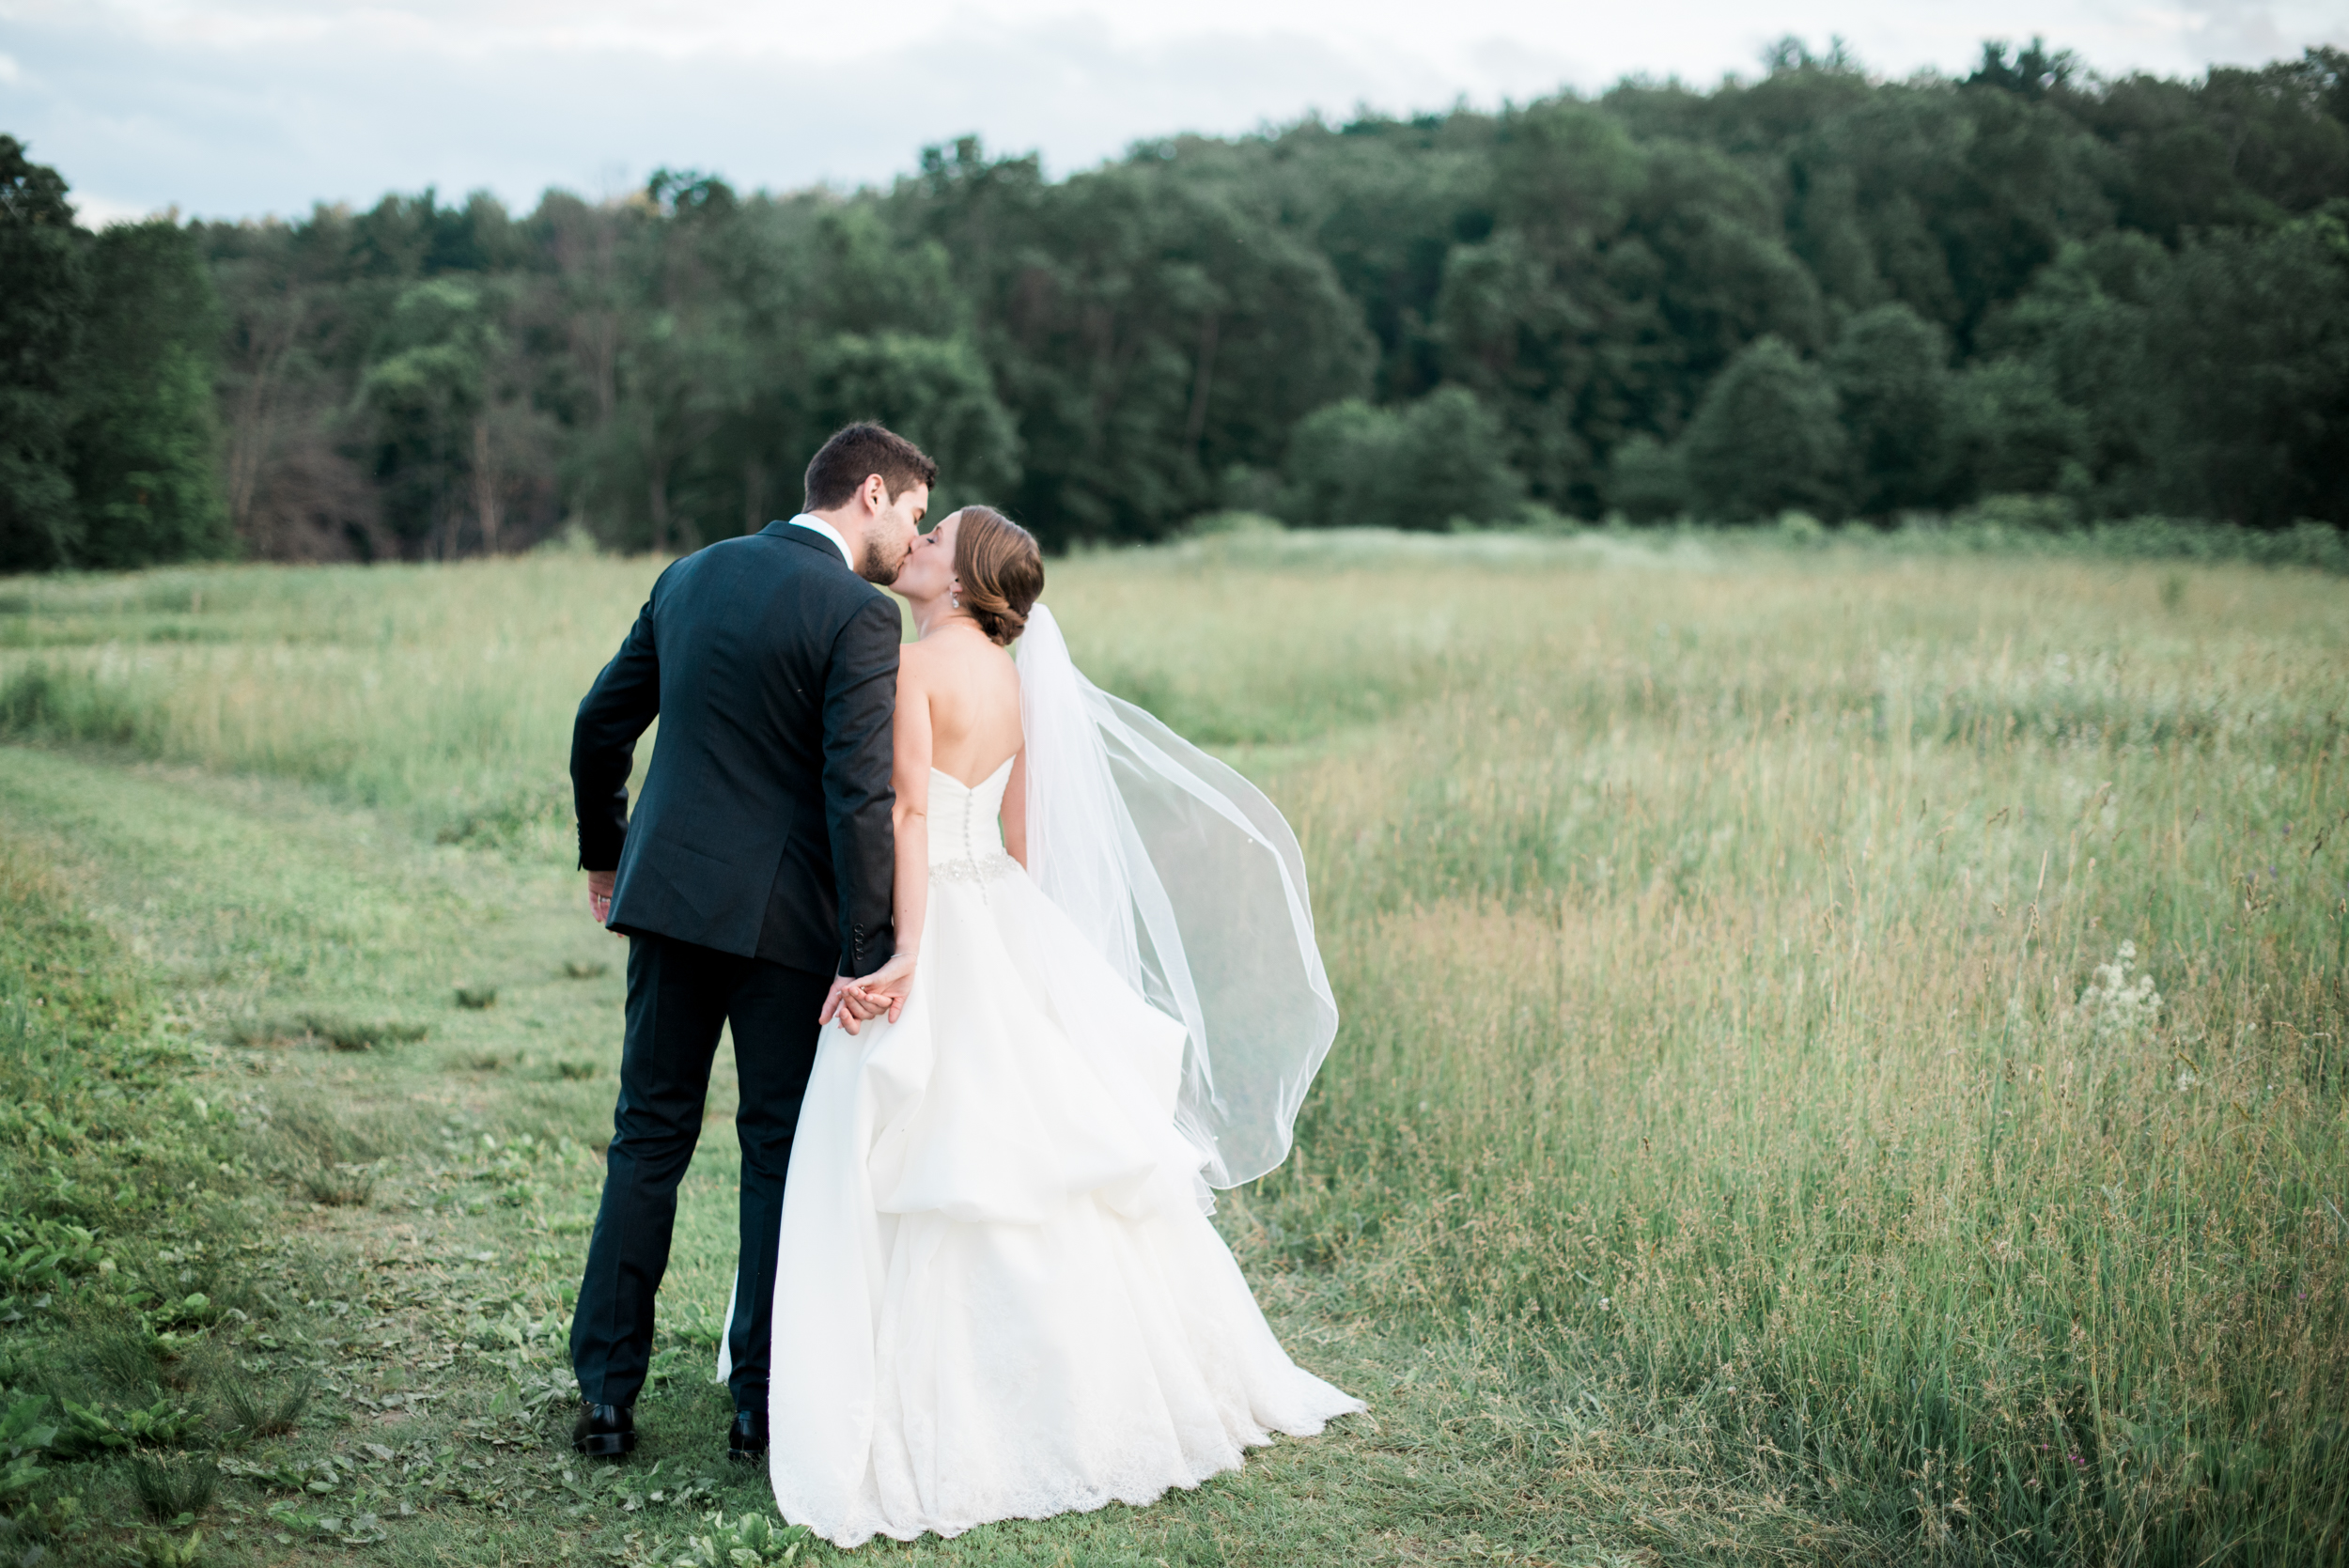 Timeless wedding photography in Western Mass